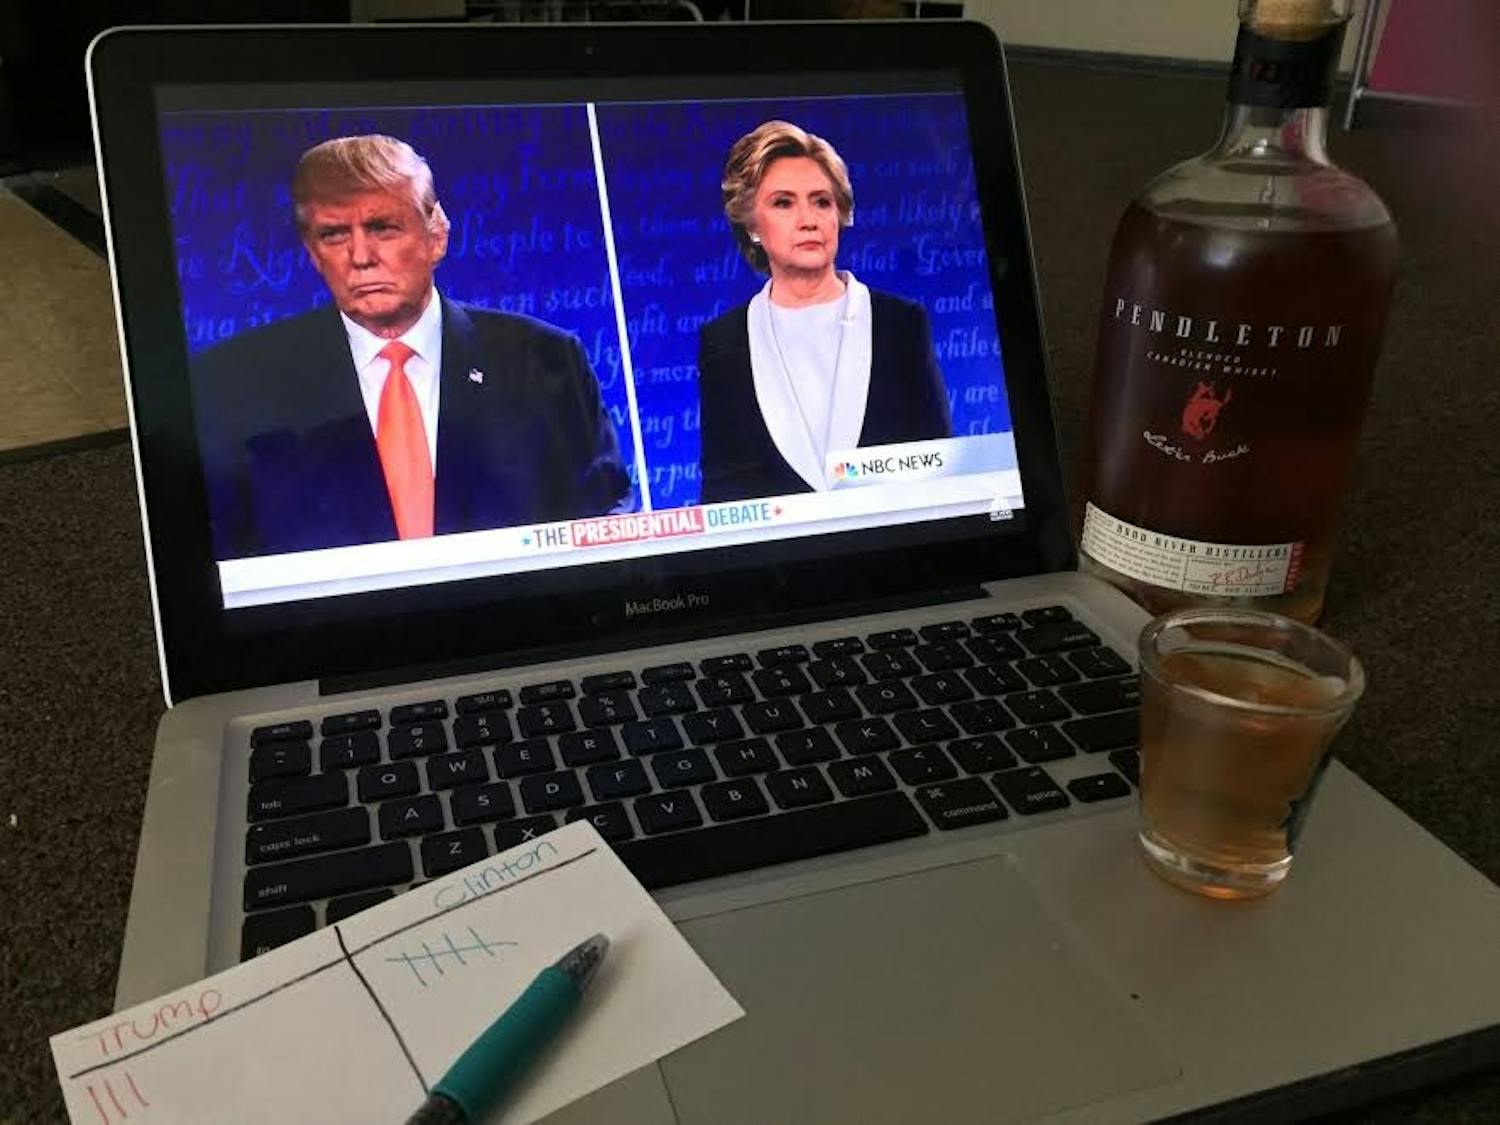 Photo illustrates&nbsp;Candidates Donald Trump and Hilary Clinton at the second presidential debate with a score card of how many "buzzwords" they have said.